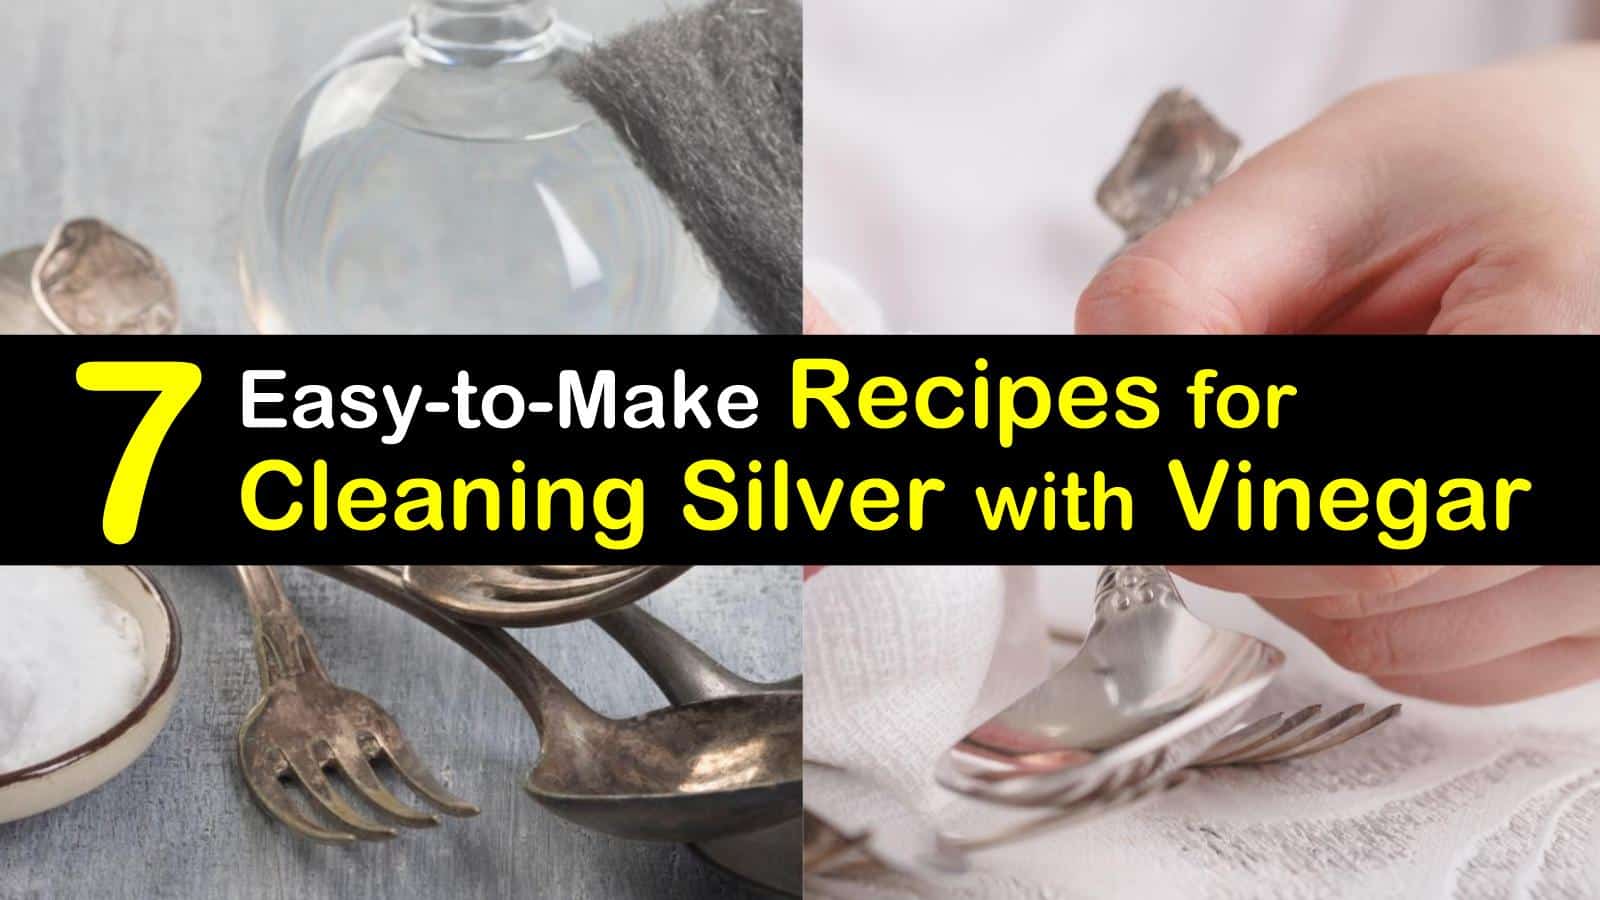 17 Easy-to-Make Recipes to Clean Silver with Vinegar